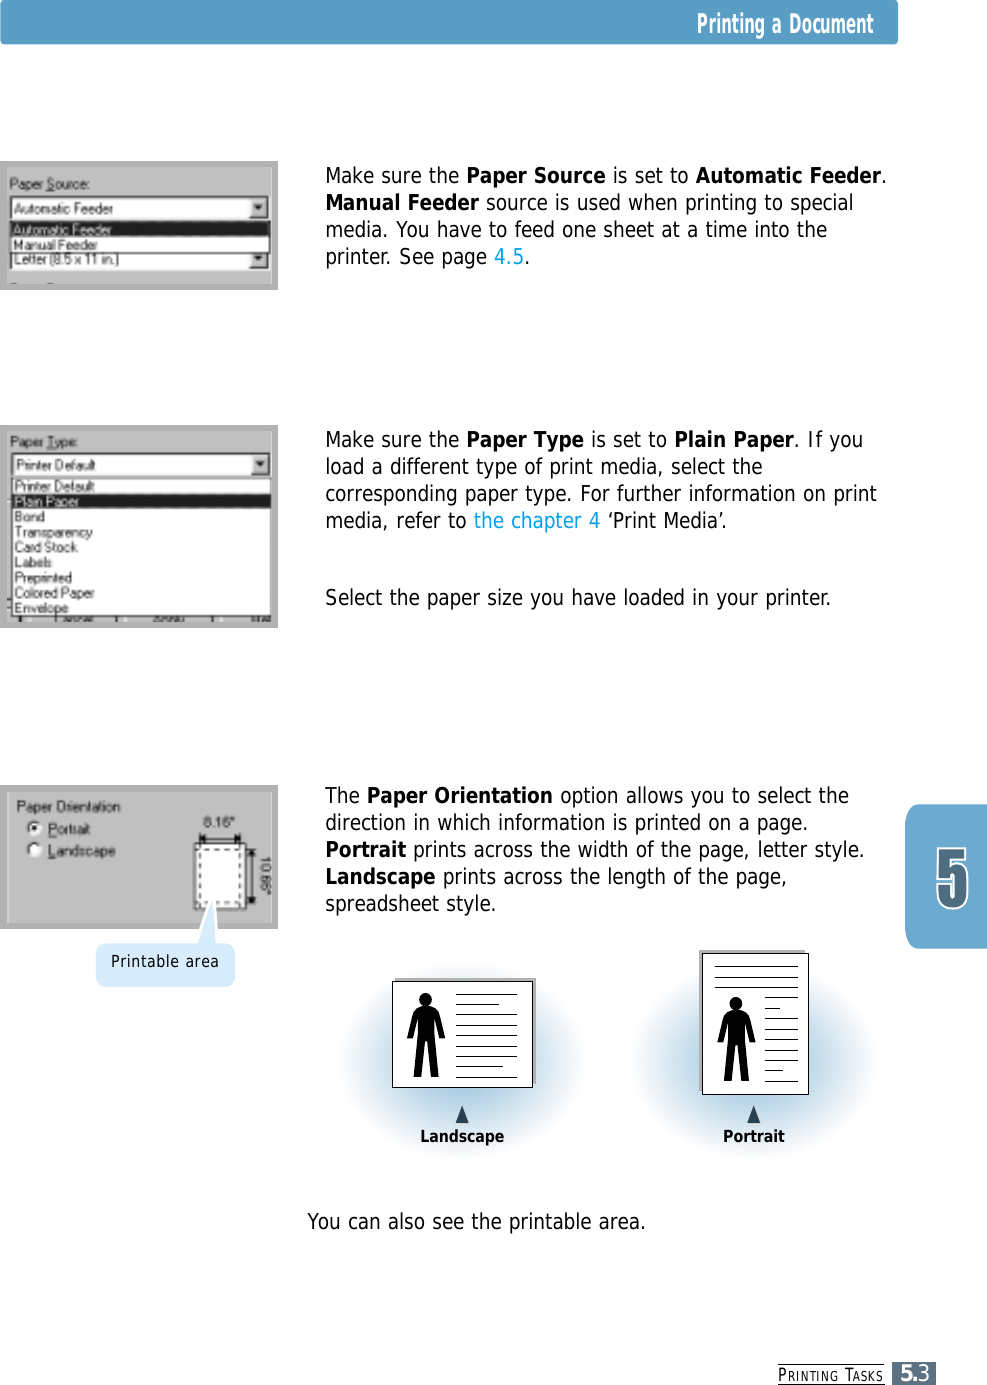 PRINTING TASKS5.3Printing a Document4Make sure the Paper Source is set to Automatic Feeder.Manual Feeder source is used when printing to specialmedia. You have to feed one sheet at a time into theprinter. See page 4.5.4Make sure the Paper Type is set to Plain Paper. If youload a different type of print media, select thecorresponding paper type. For further information on printmedia, refer to the chapter 4 ‘Print Media’.  4Select the paper size you have loaded in your printer.4You can also see the printable area.4The Paper Orientation option allows you to select thedirection in which information is printed on a page.Portrait prints across the width of the page, letter style.Landscape prints across the length of the page,spreadsheet style.&quot;&quot;Landscape &quot;&quot;PortraitPrintable area